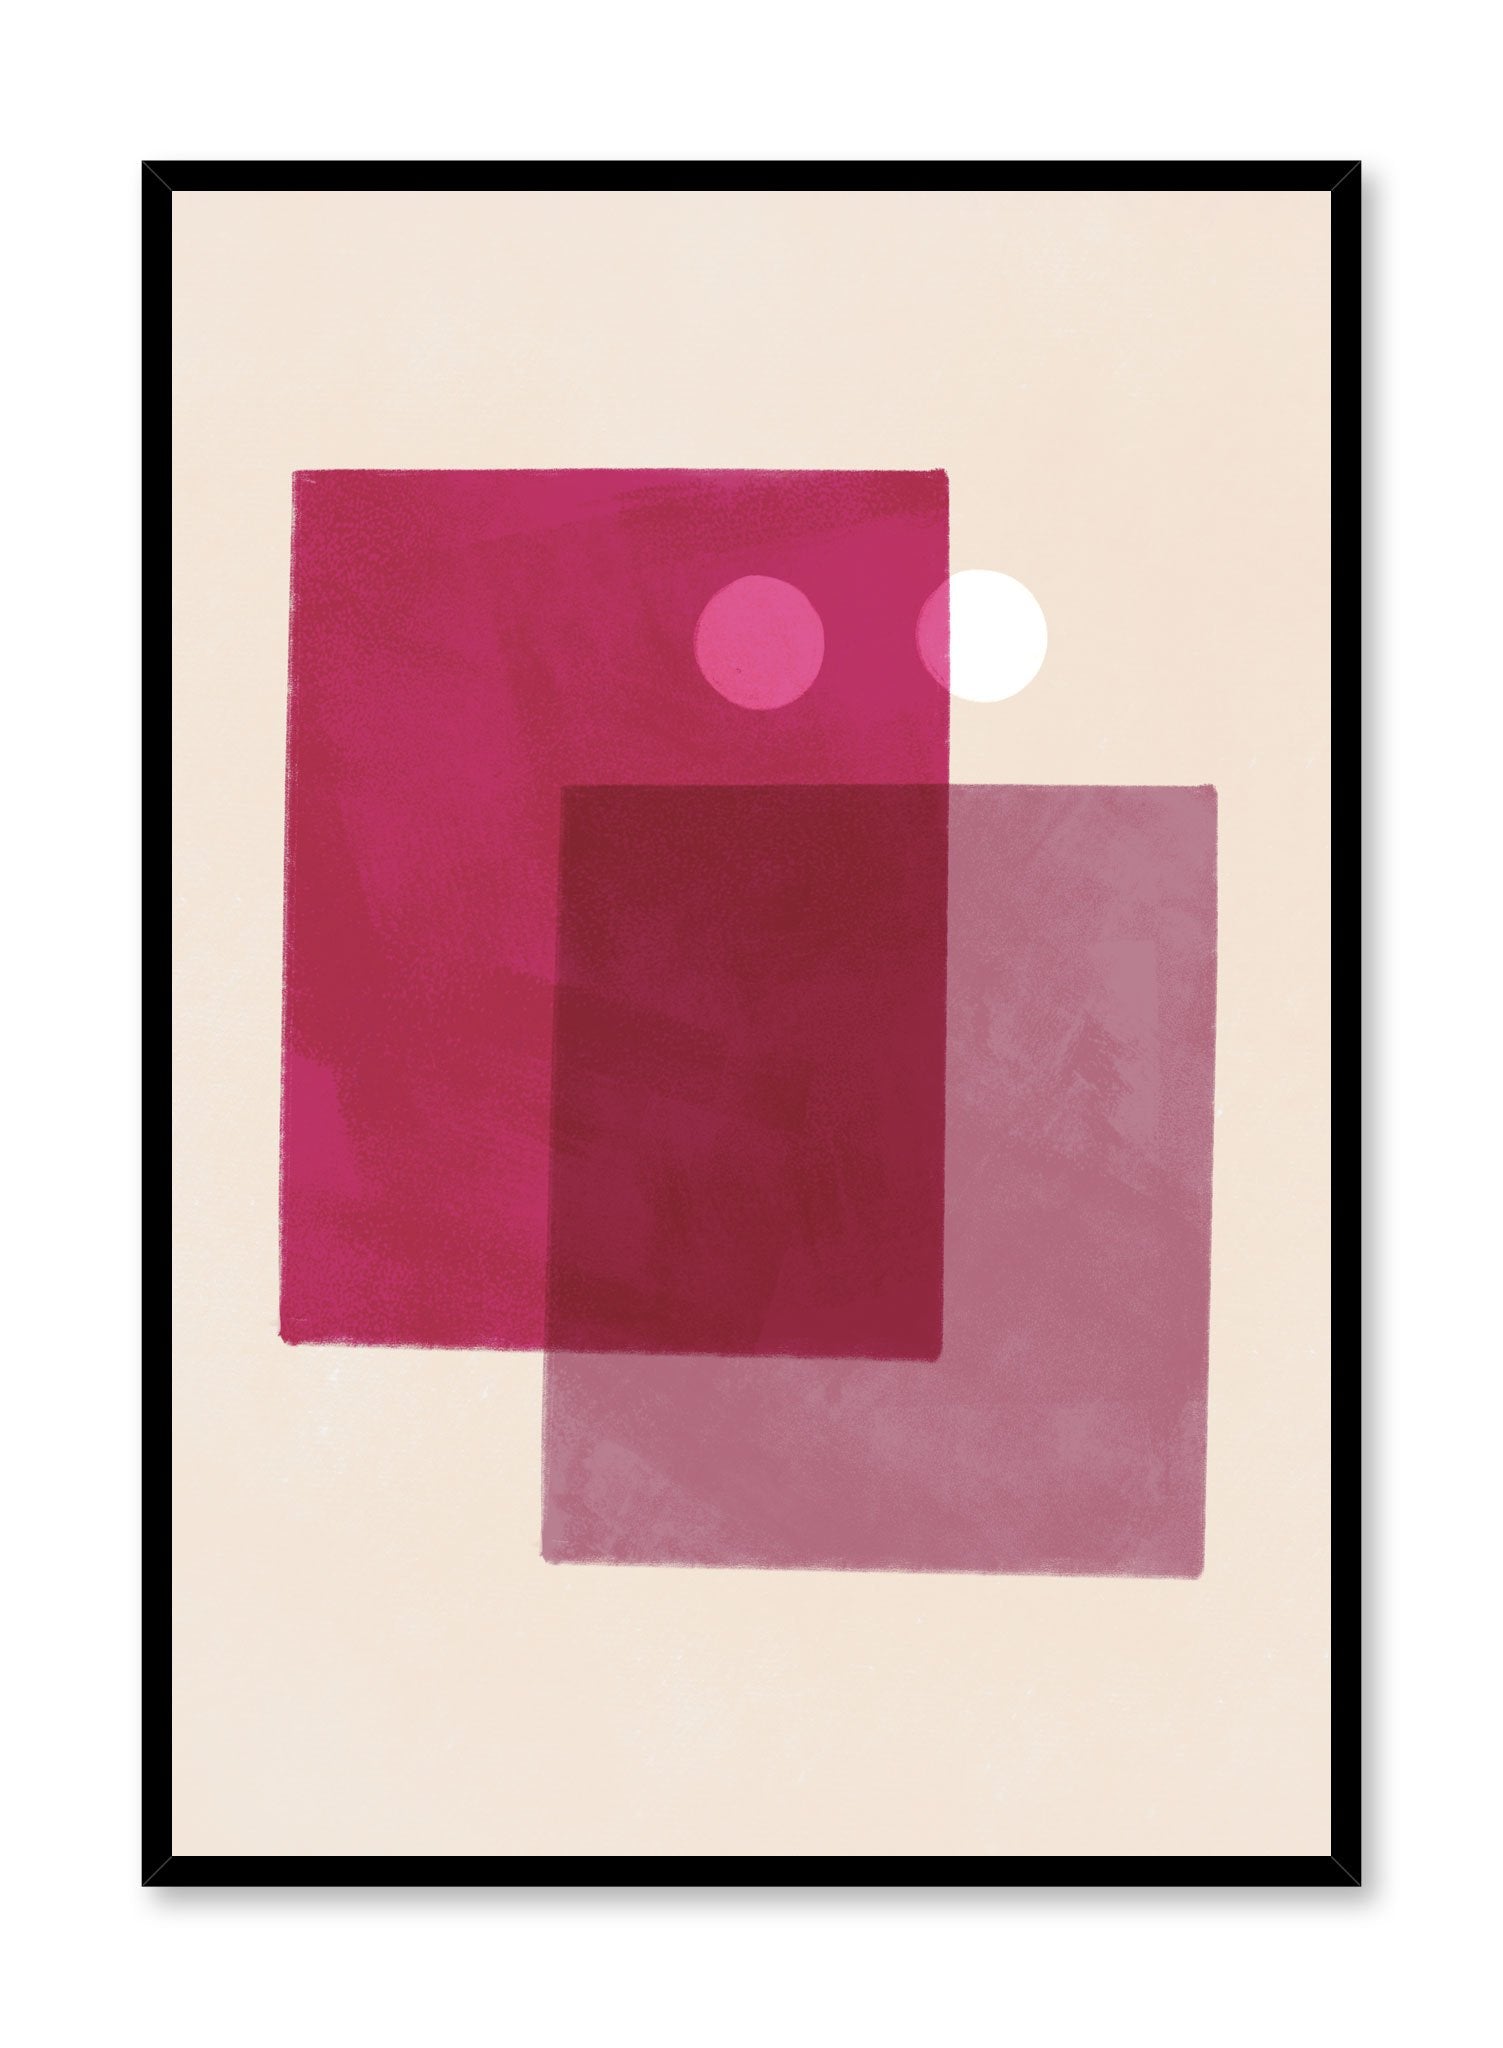 Modern minimalist poster by Opposite Wall with abstract design of Sandy by Opposite Wall